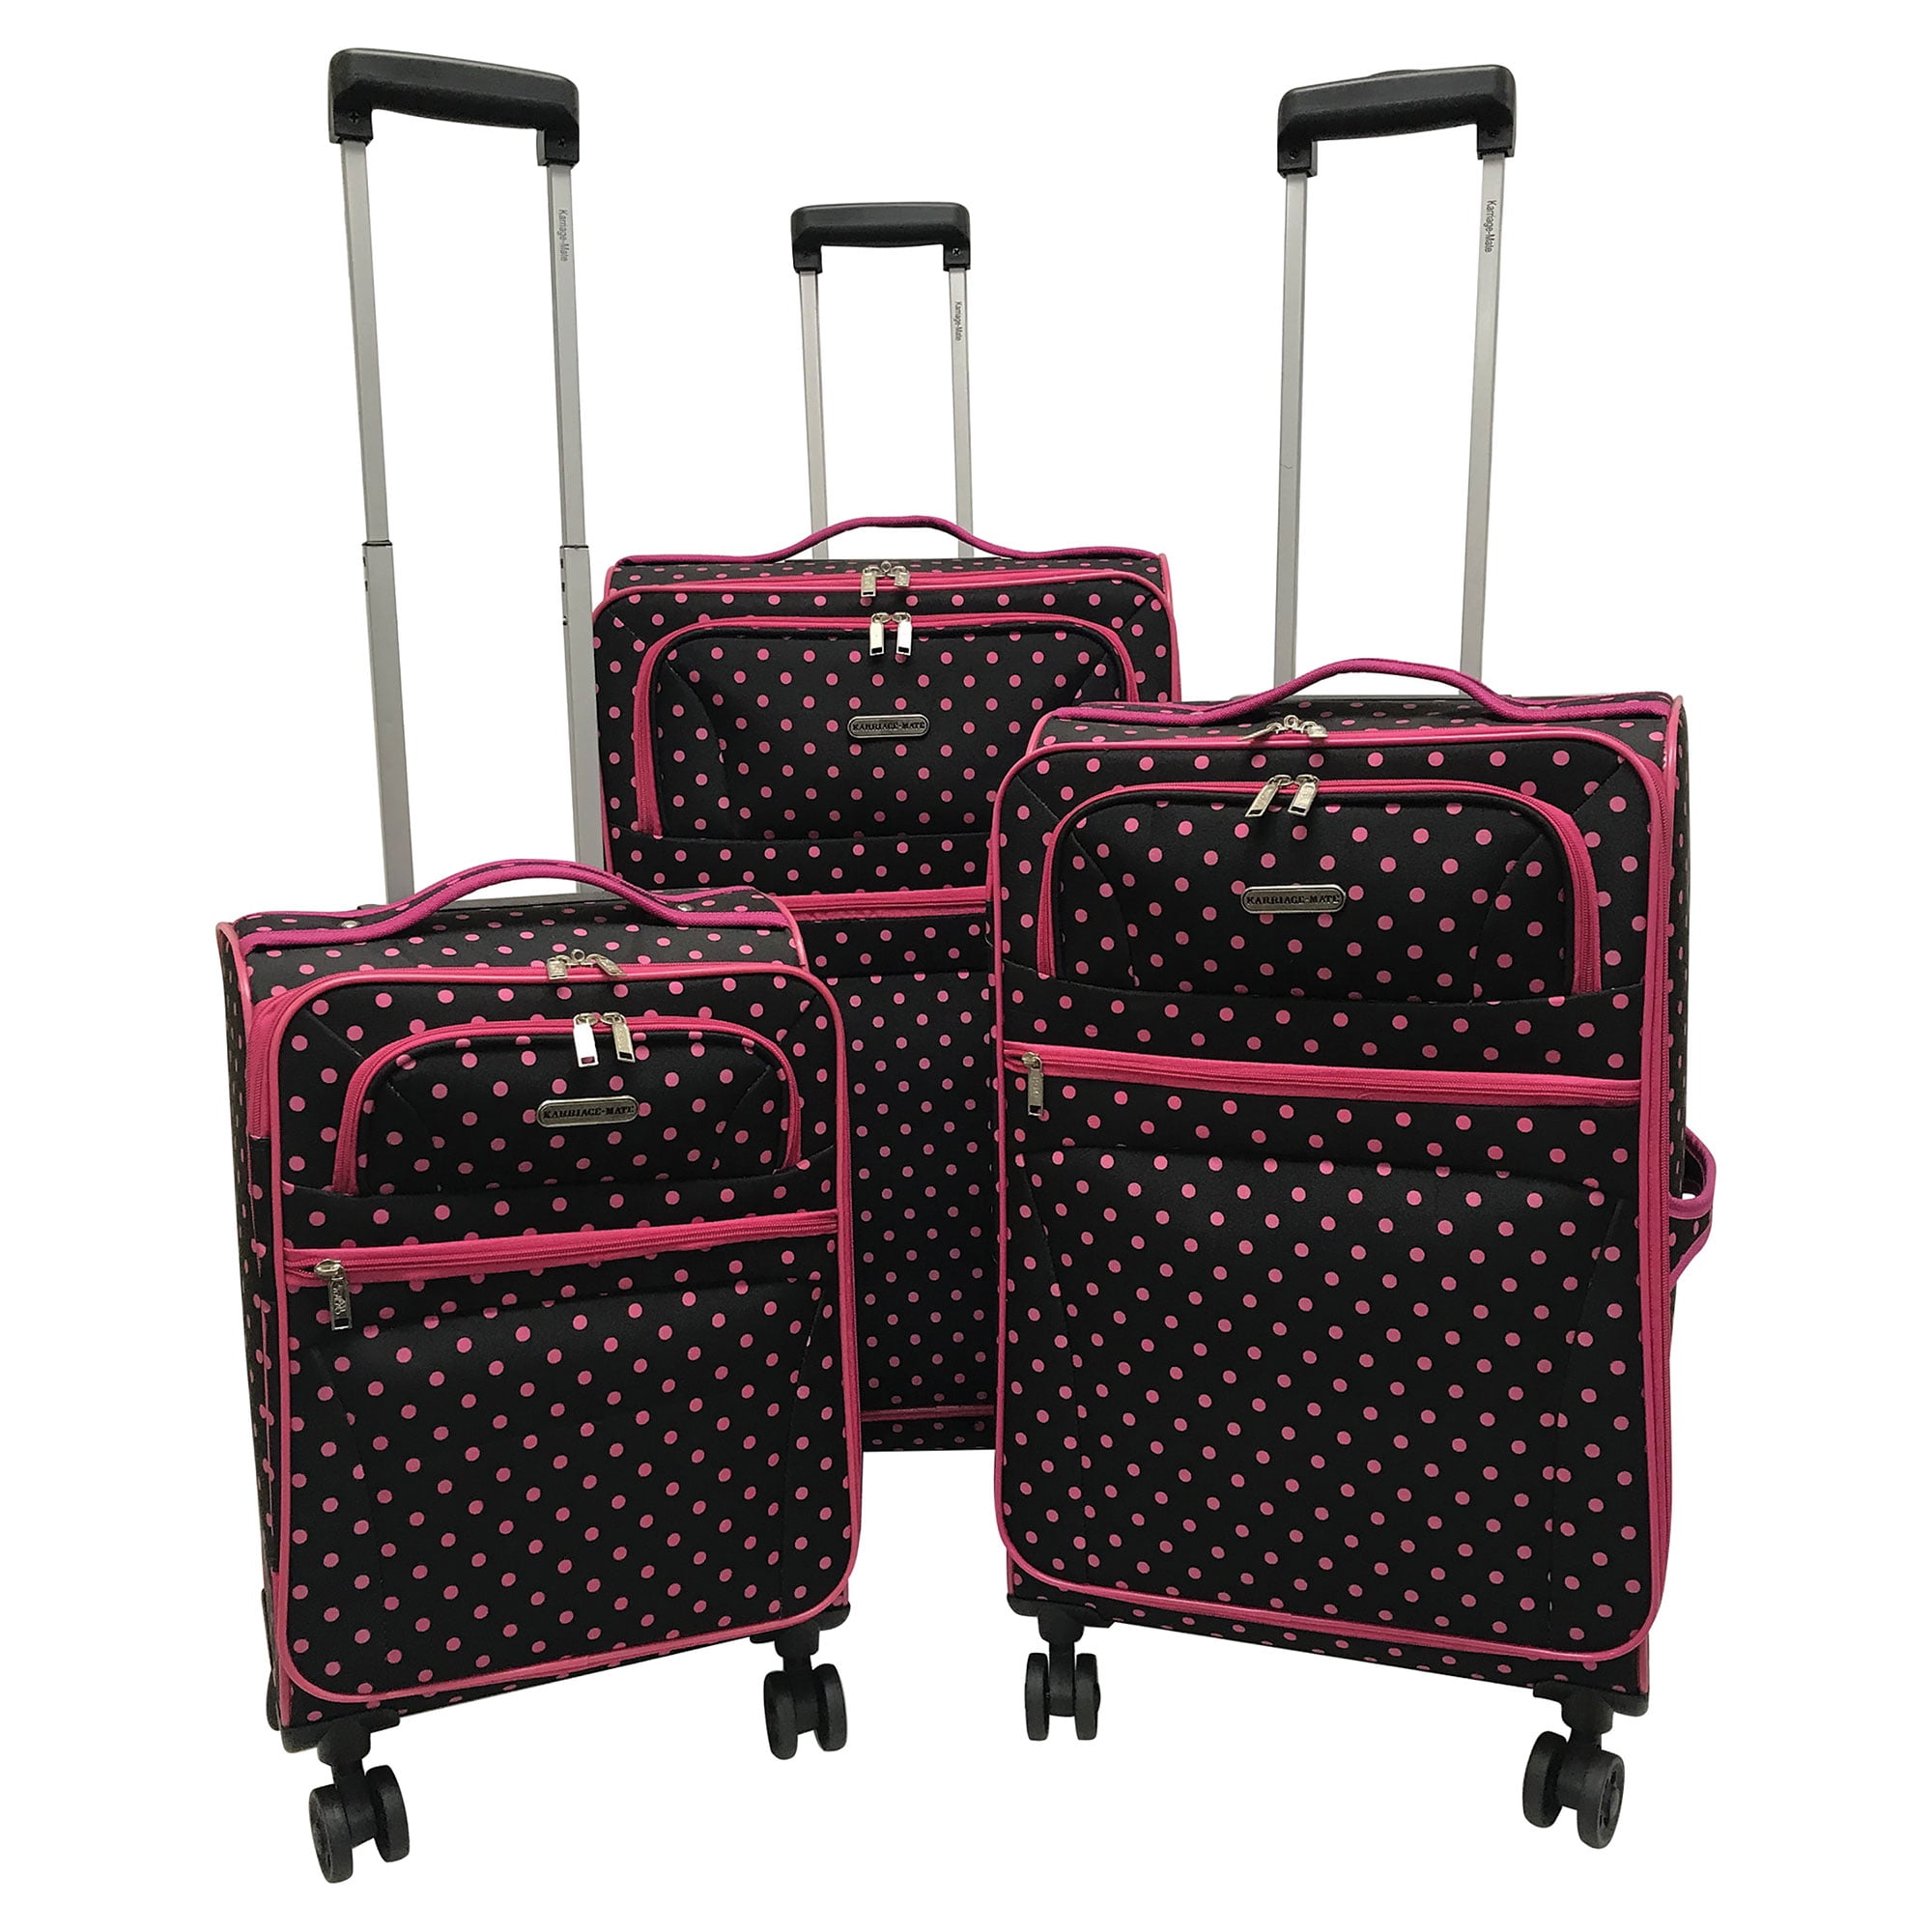 Karriage-Mate 3 pieces soft-side luggage set with cheetah pattern